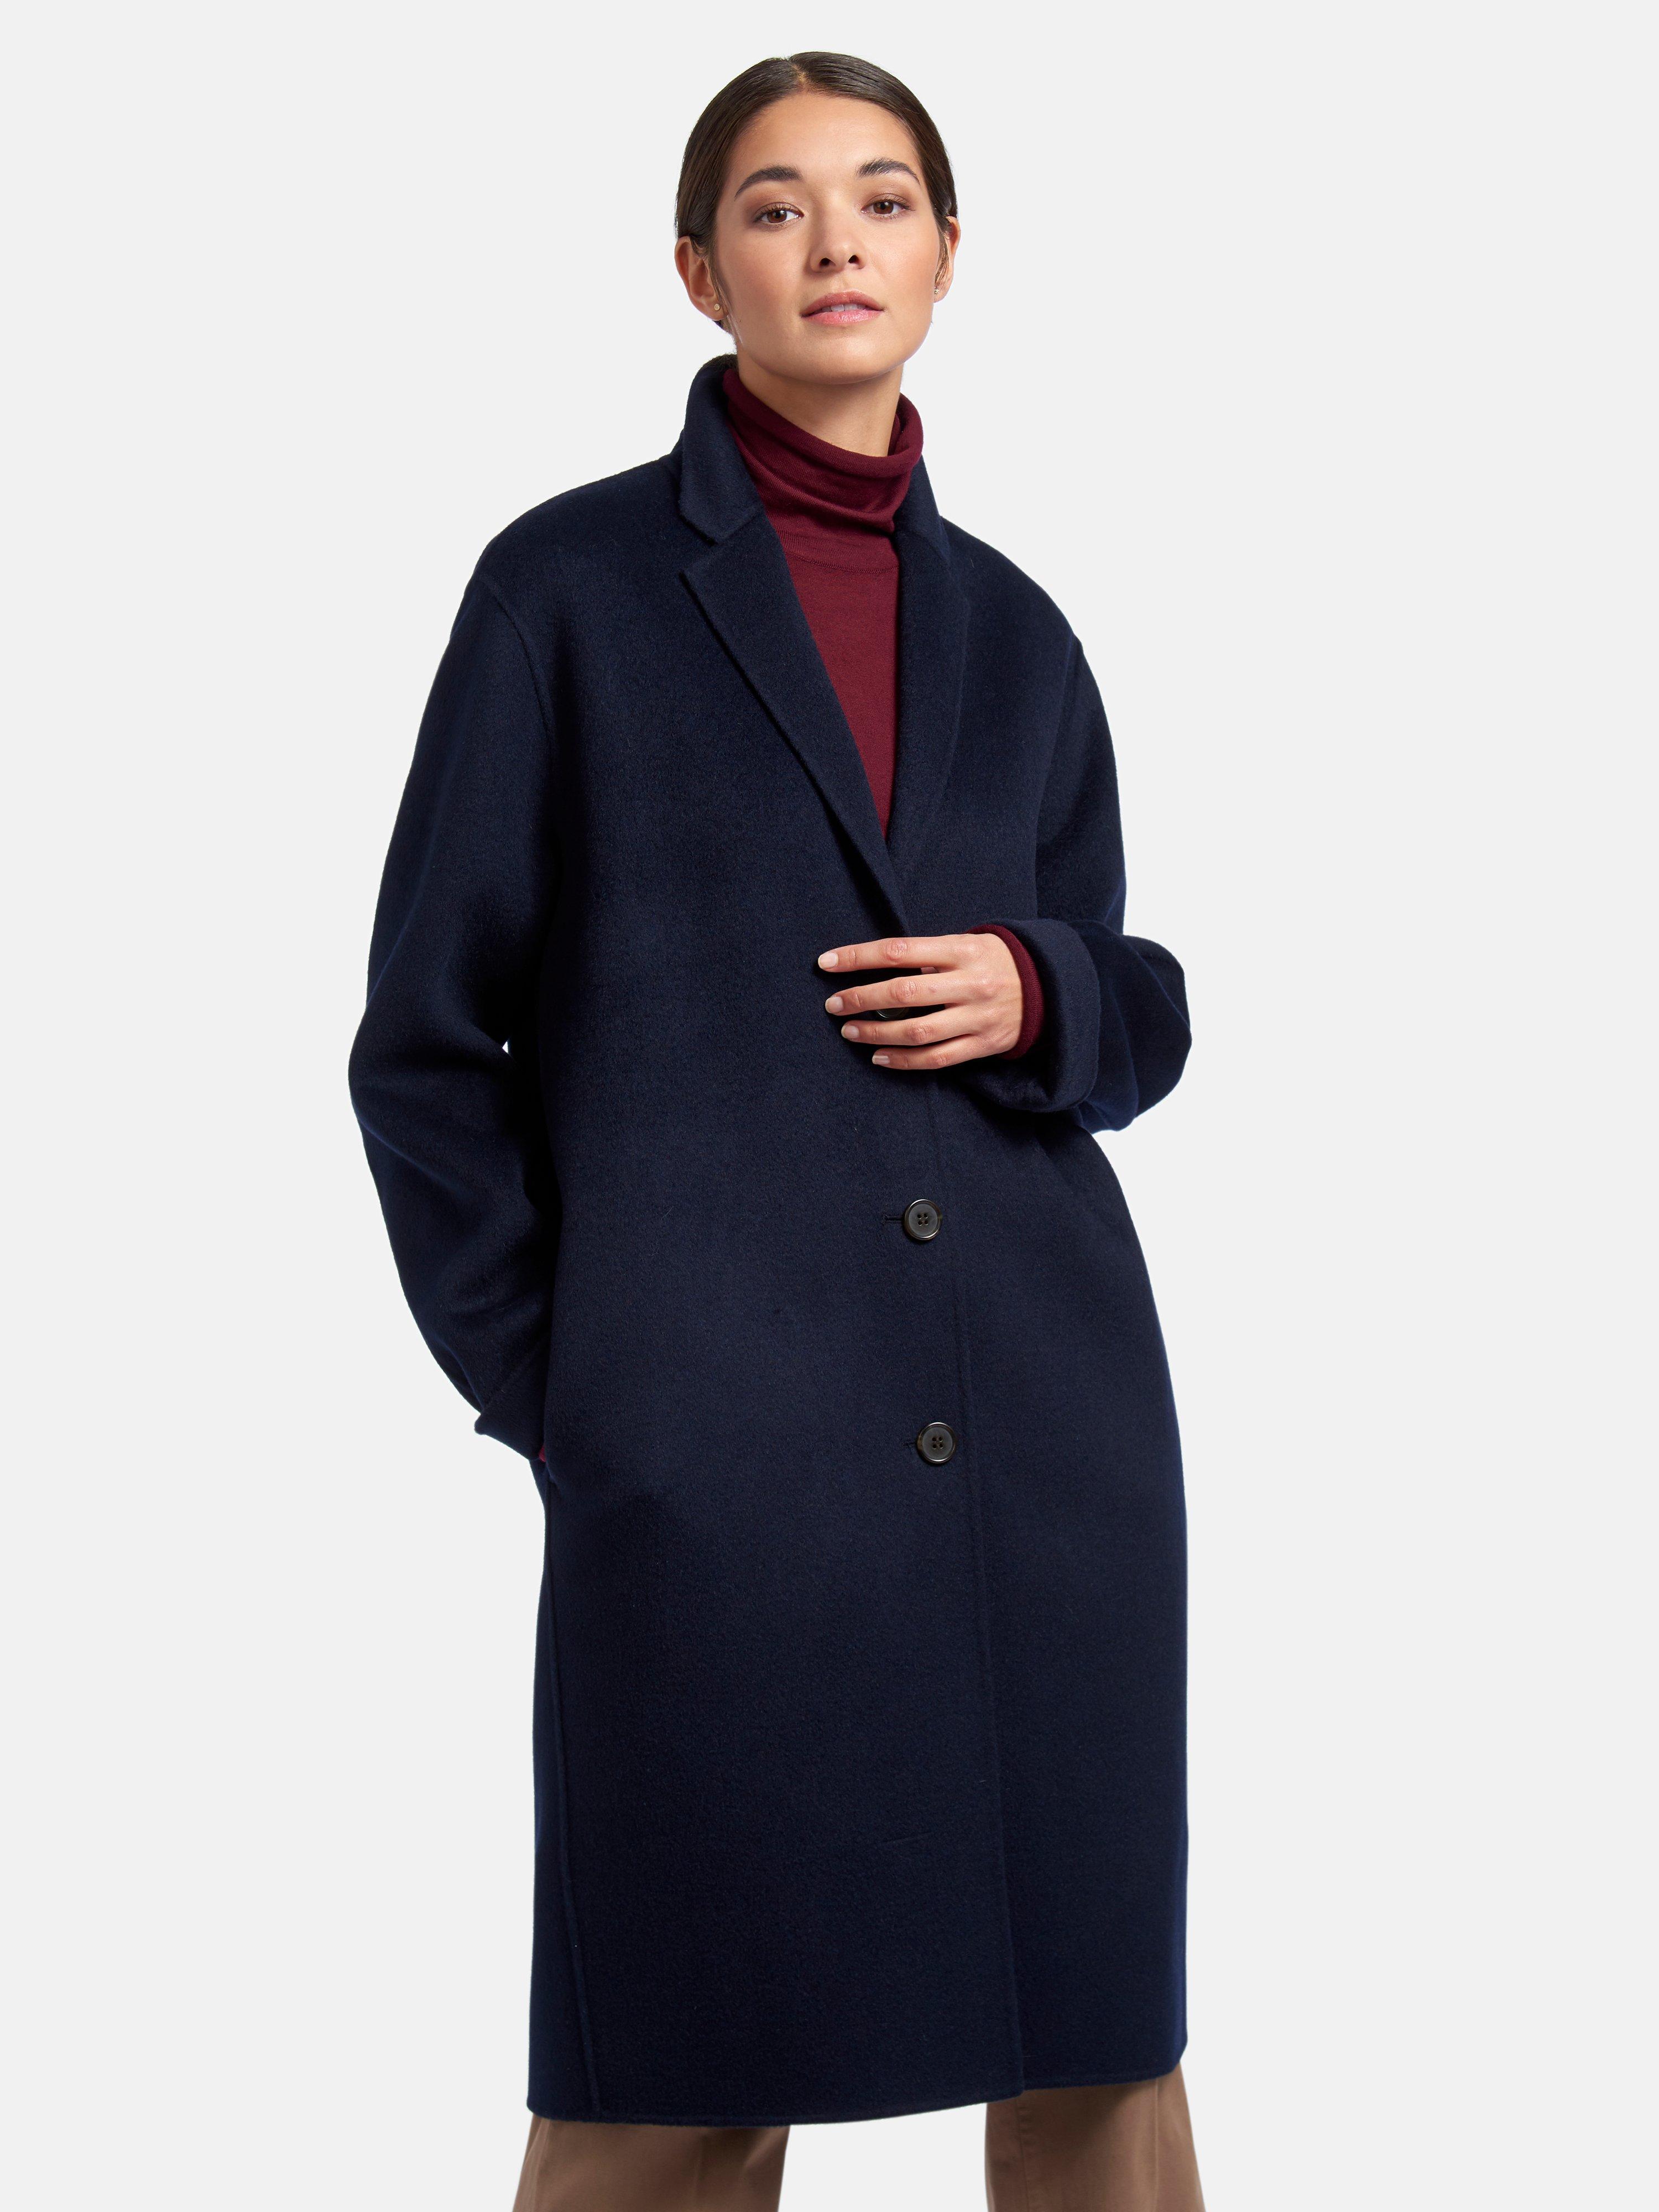 St. Emile - Coat in new milled wool and cashmere - navy